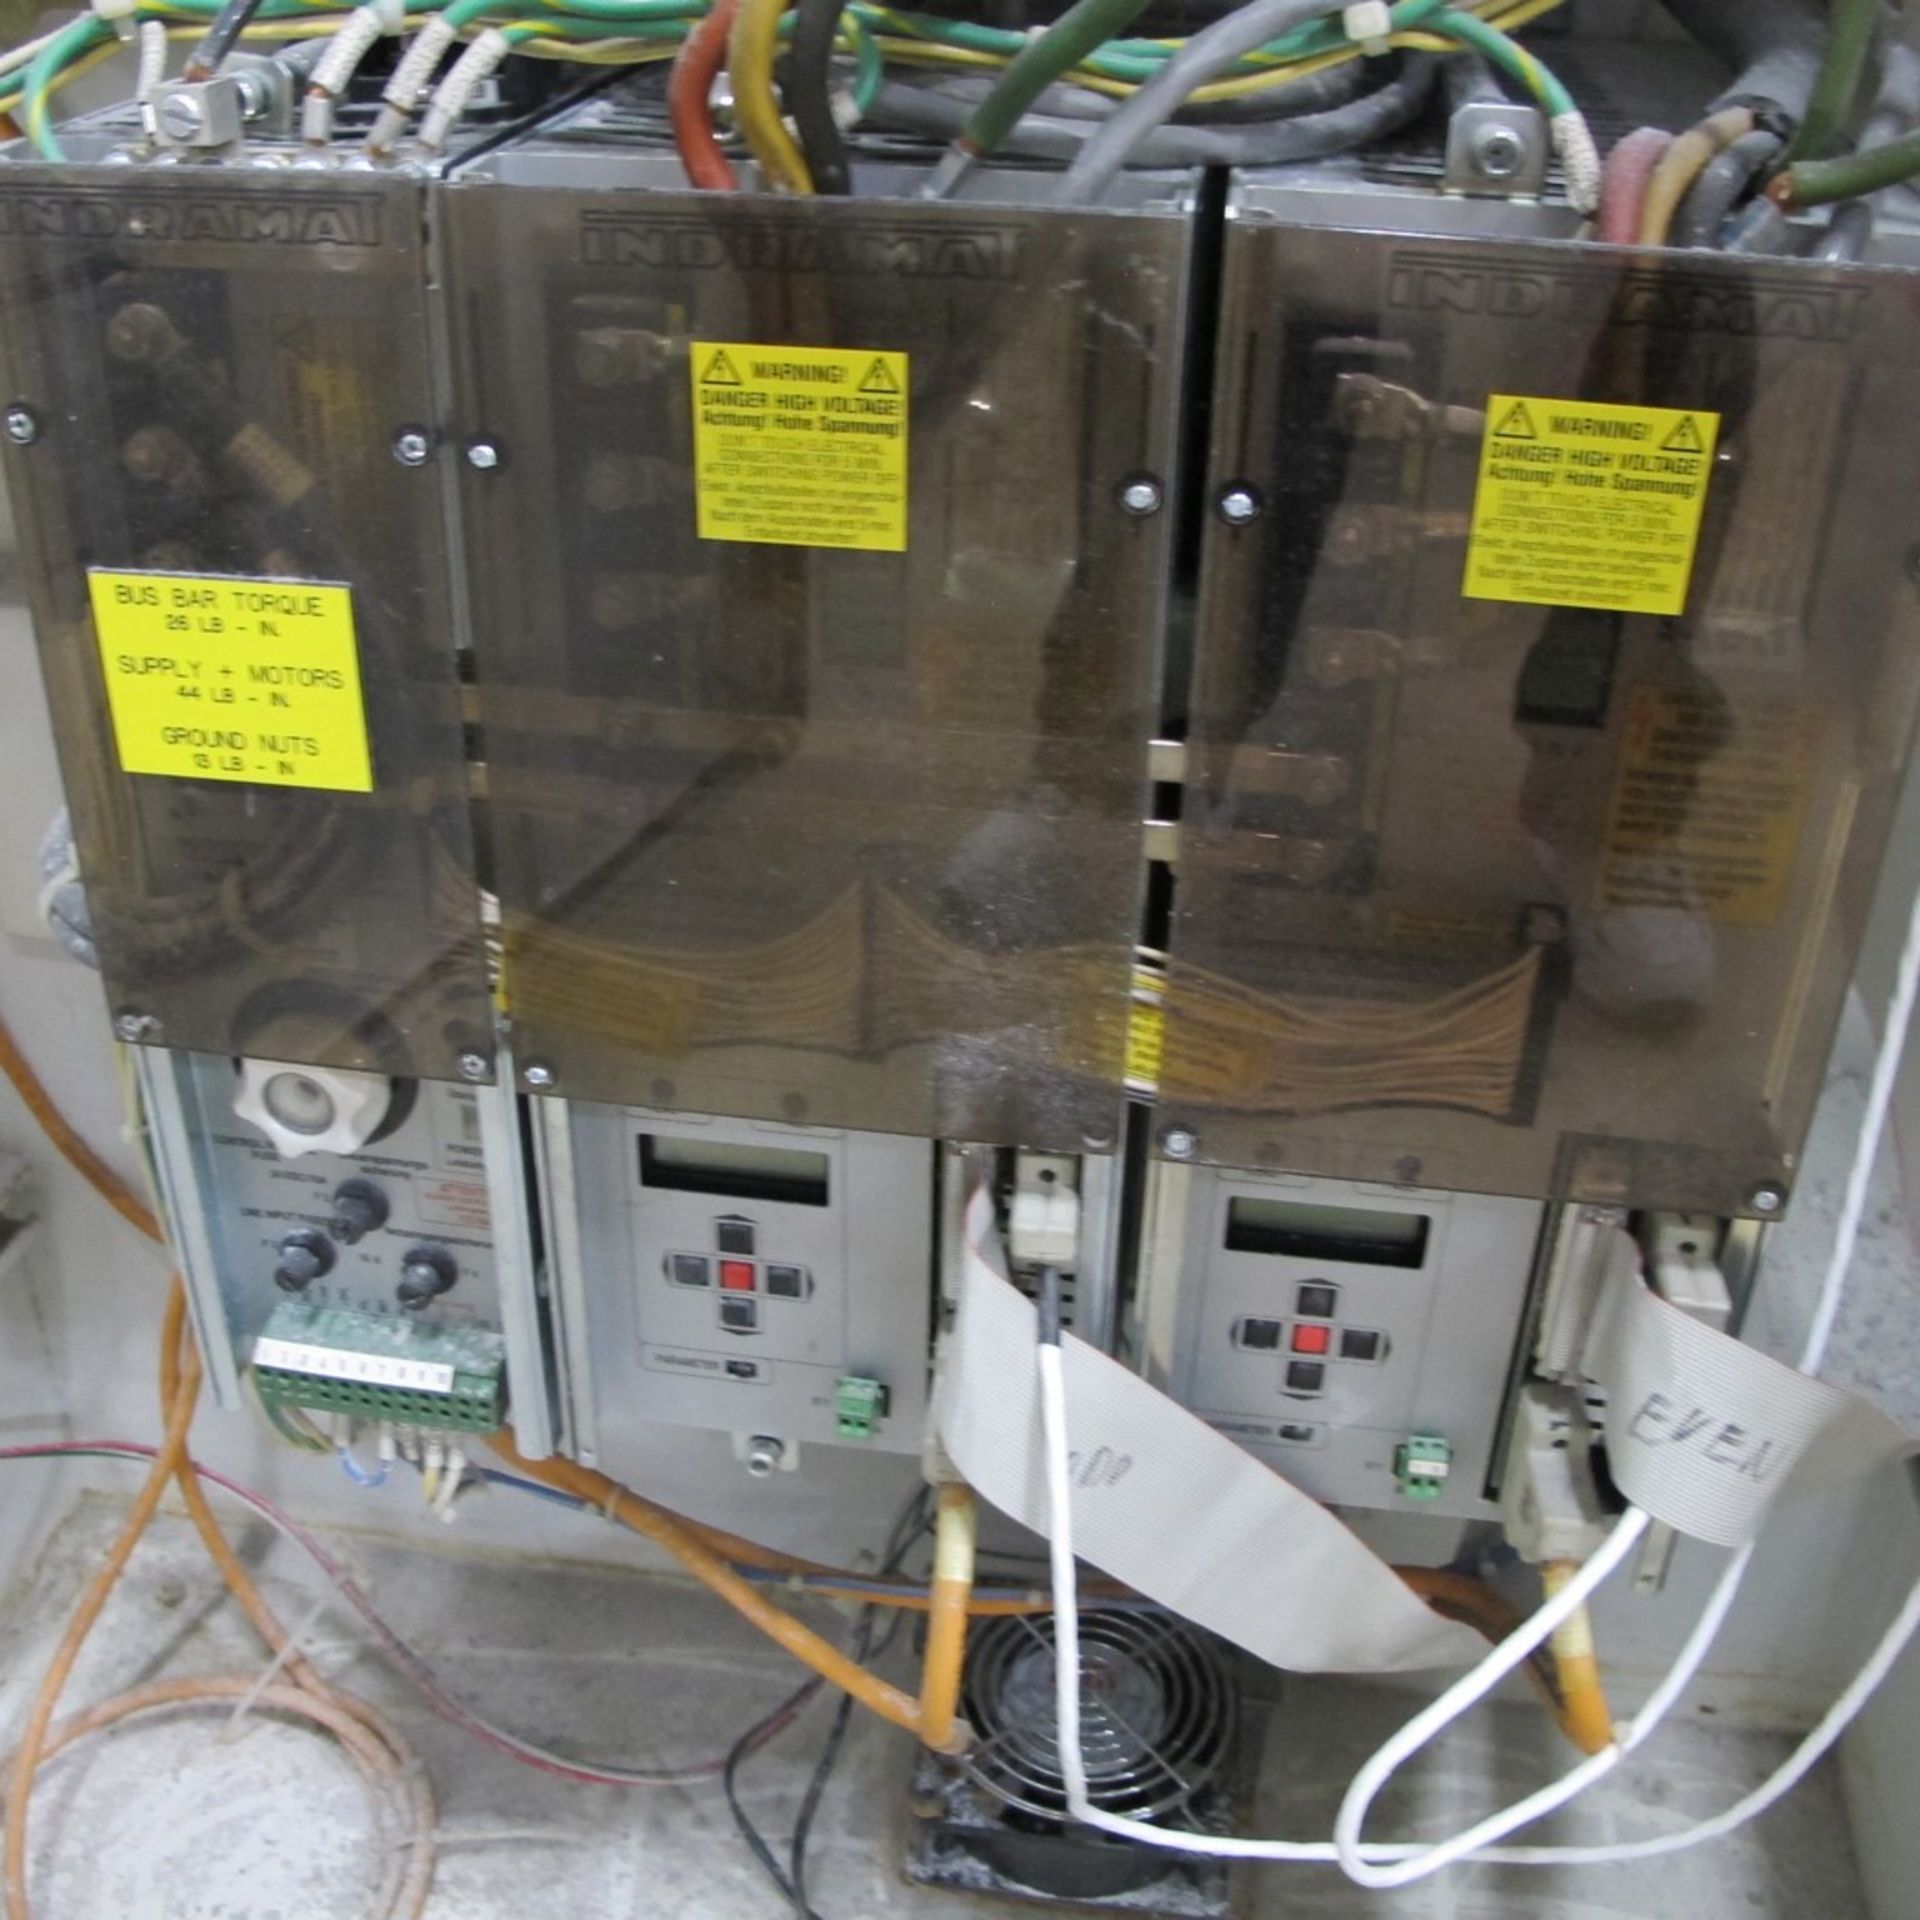 ELECTRICAL CONTROL CABINET W/ INDRAMAT SERVO CONTROLLERS AND RITTAL COOLING UNIT (BATH B4) - Image 5 of 5